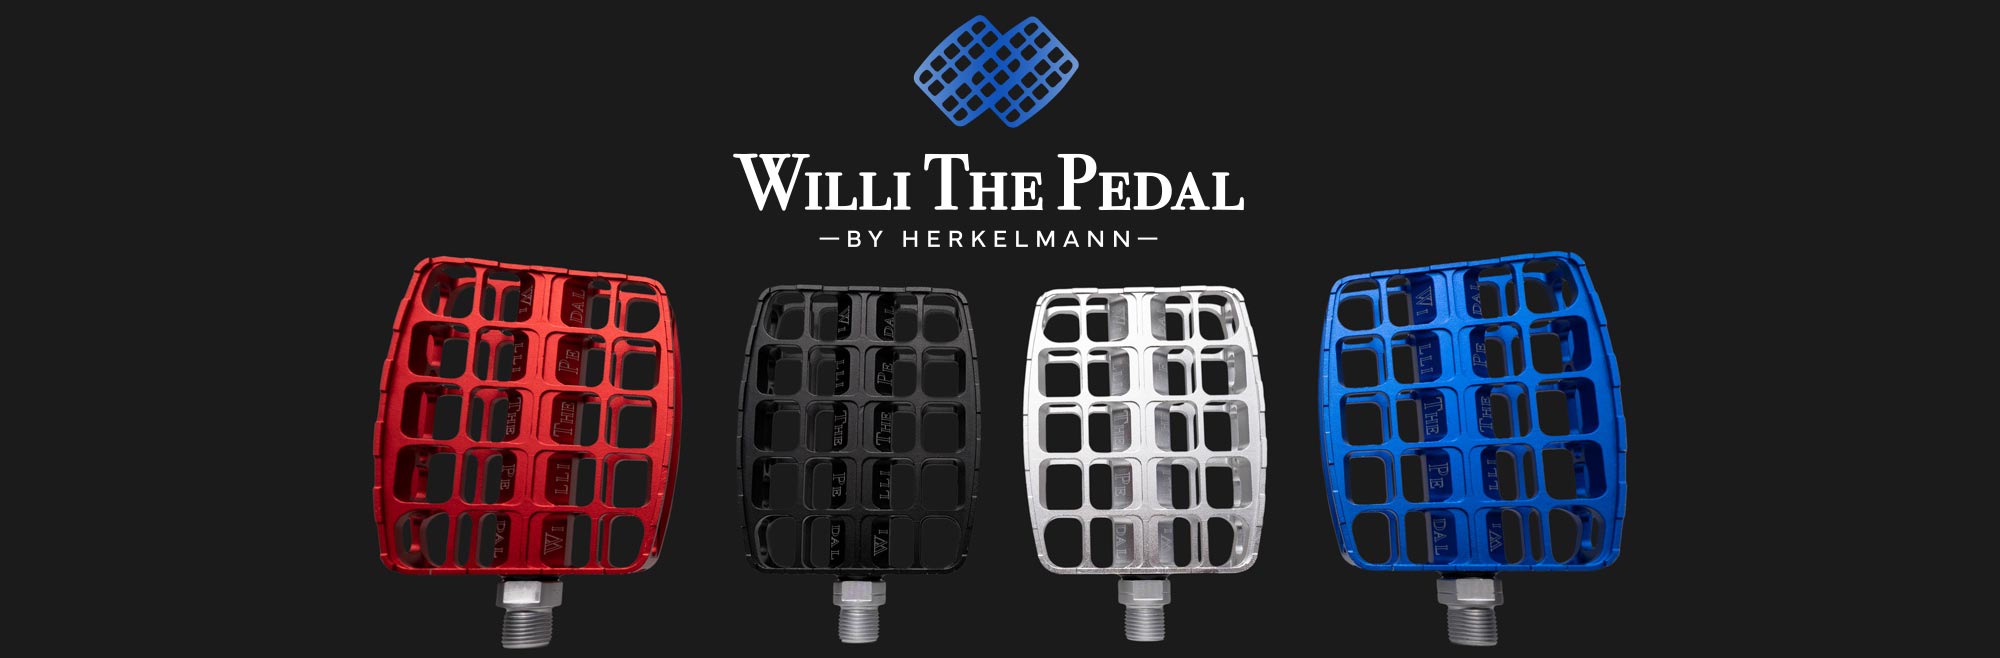 Willi the Pedal